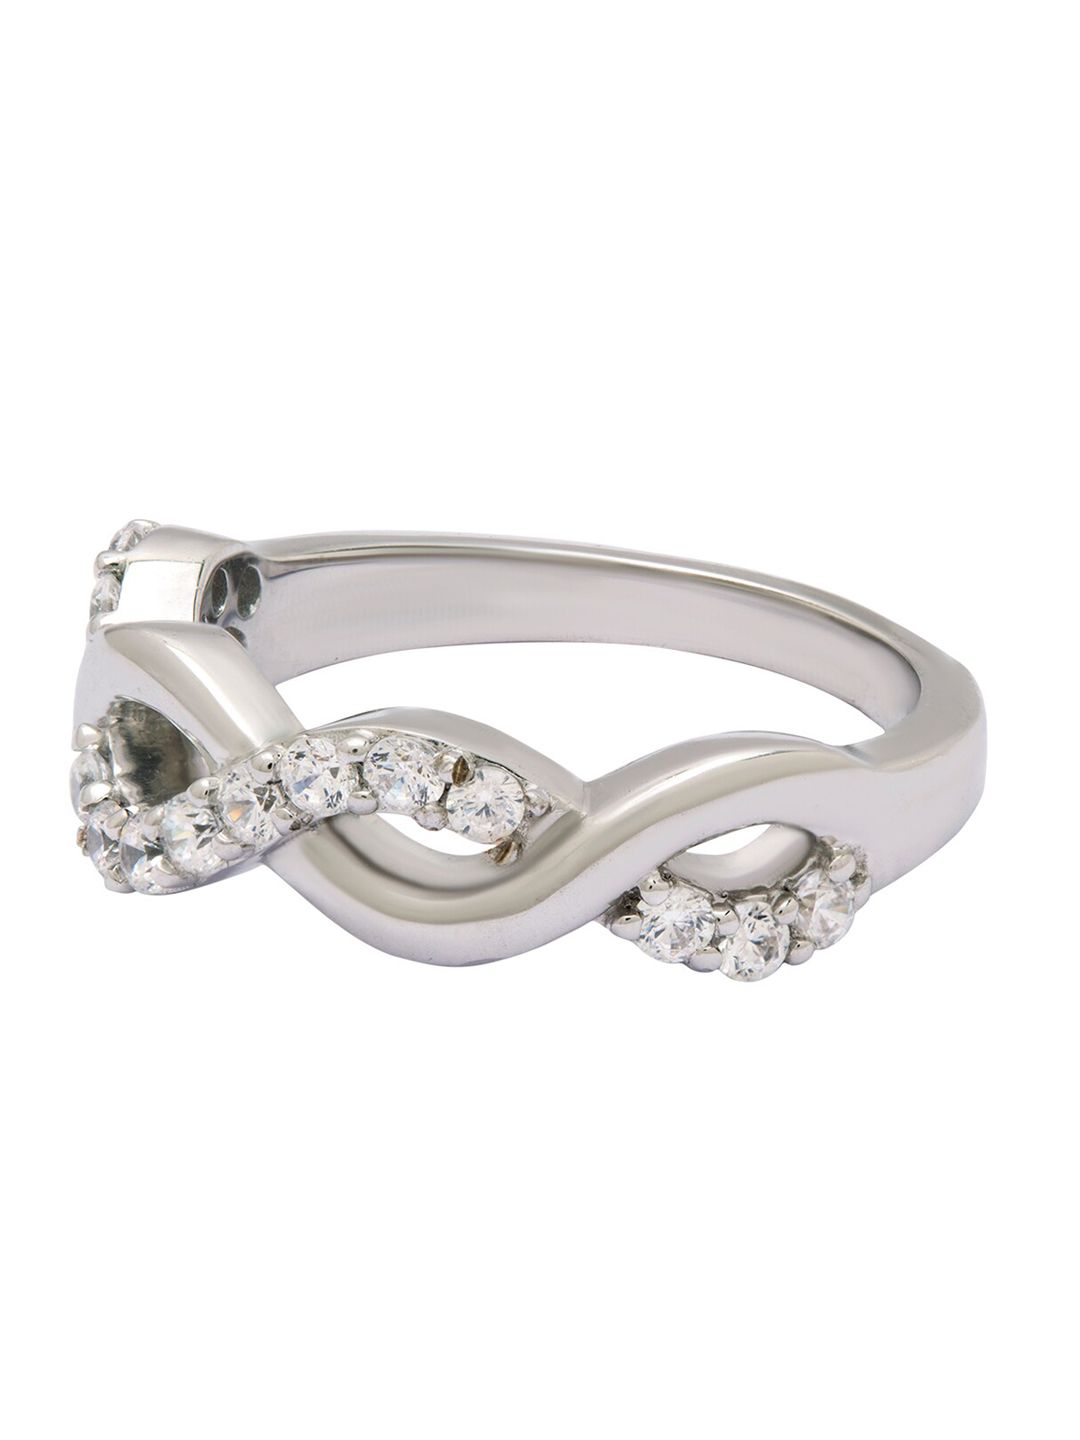 ANAYRA White 925 Sterling Silver Finger Ring Price in India